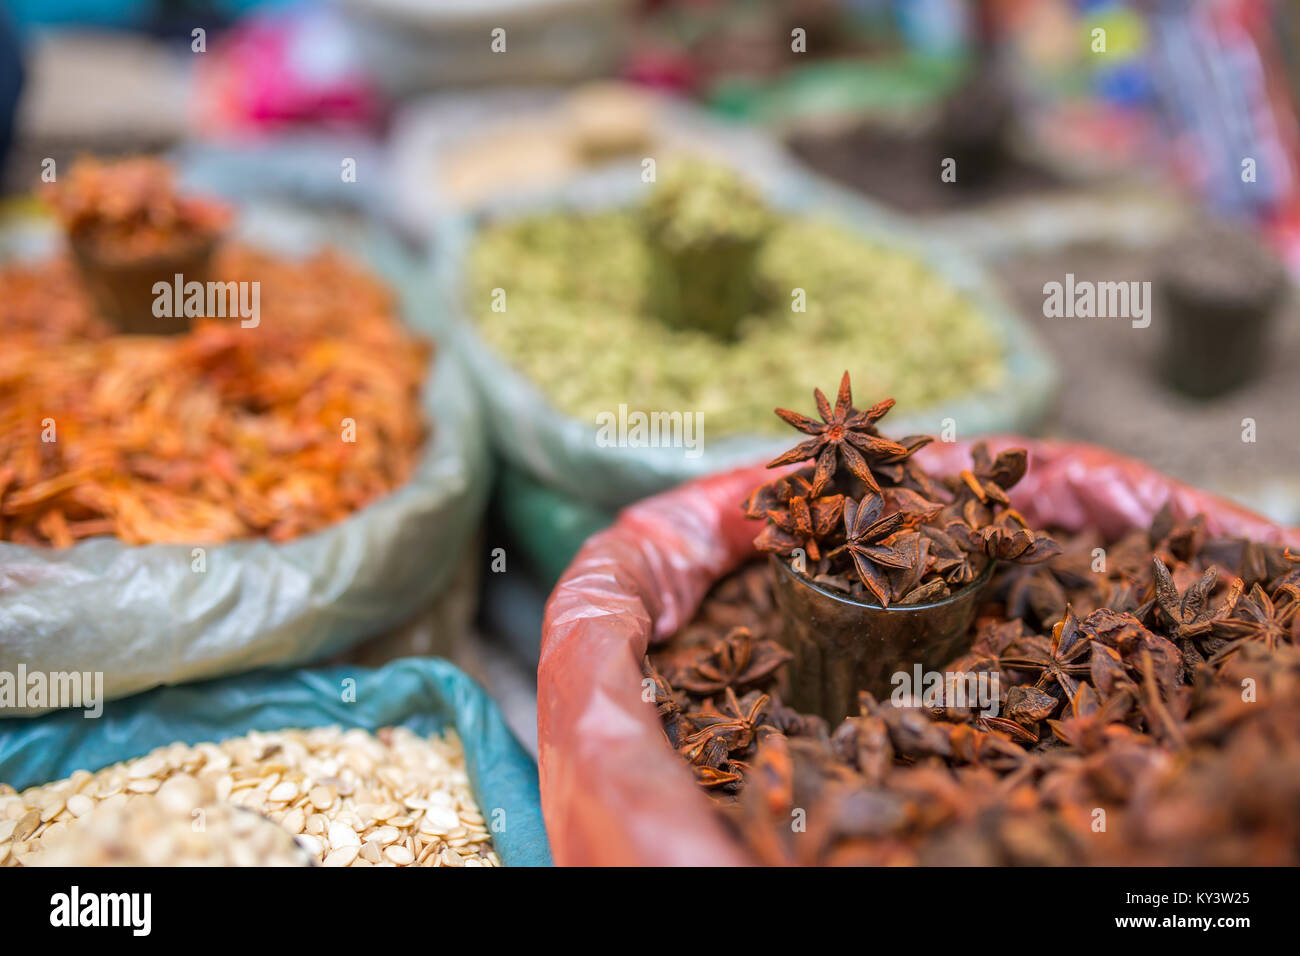 Close-up star anise and other spices on indian market stall Stock Photo